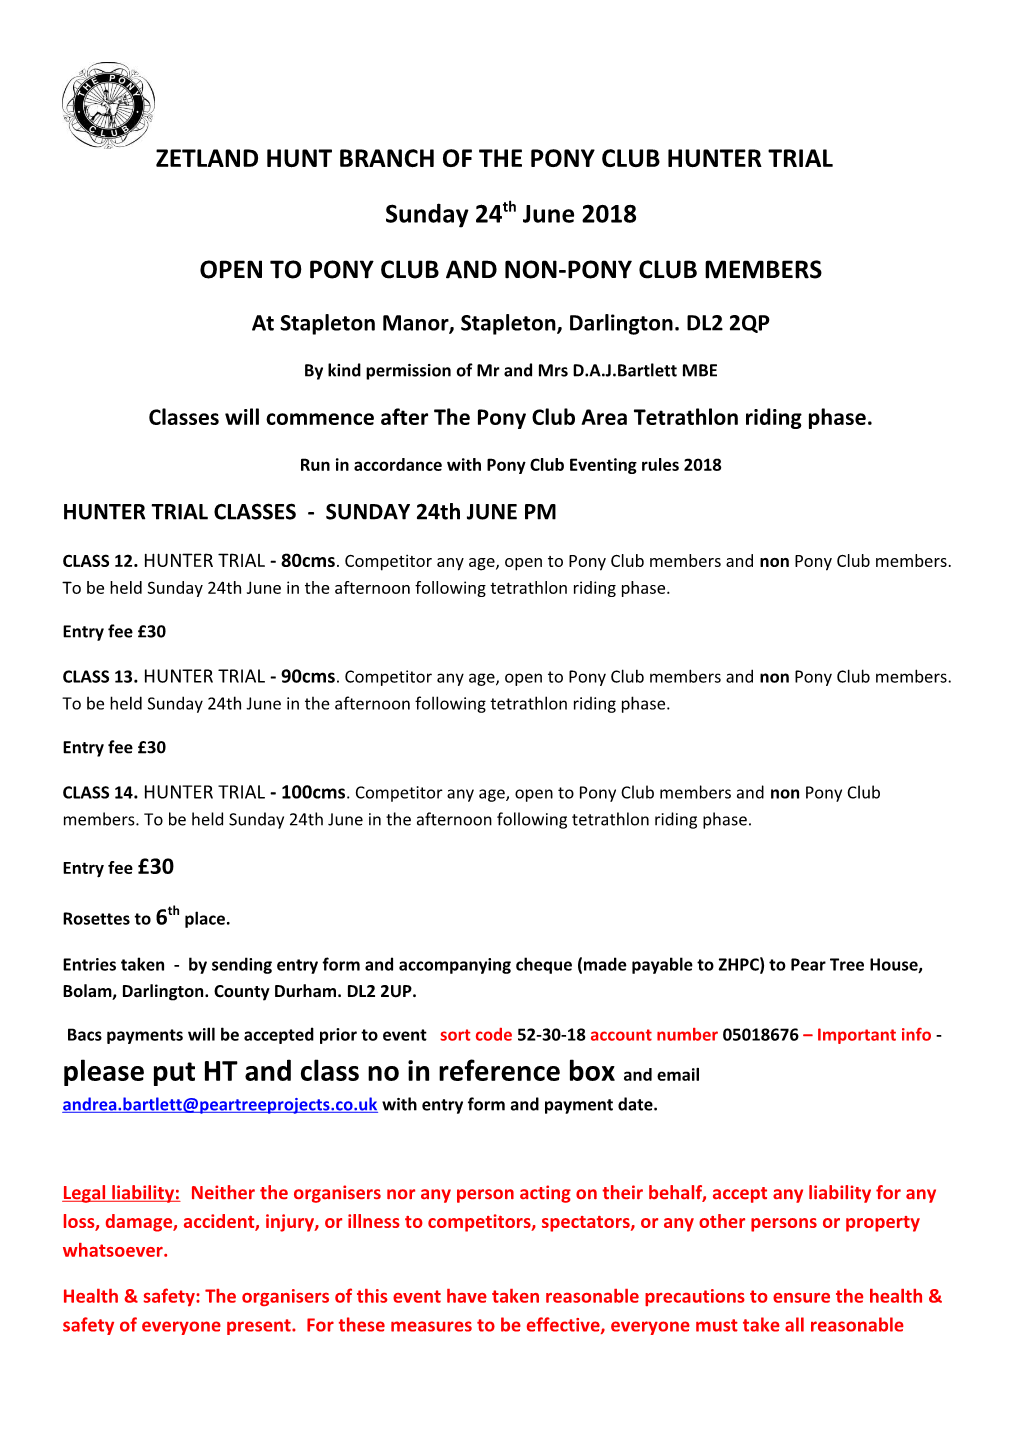 Open to Pony Club and Non-Pony Club Members